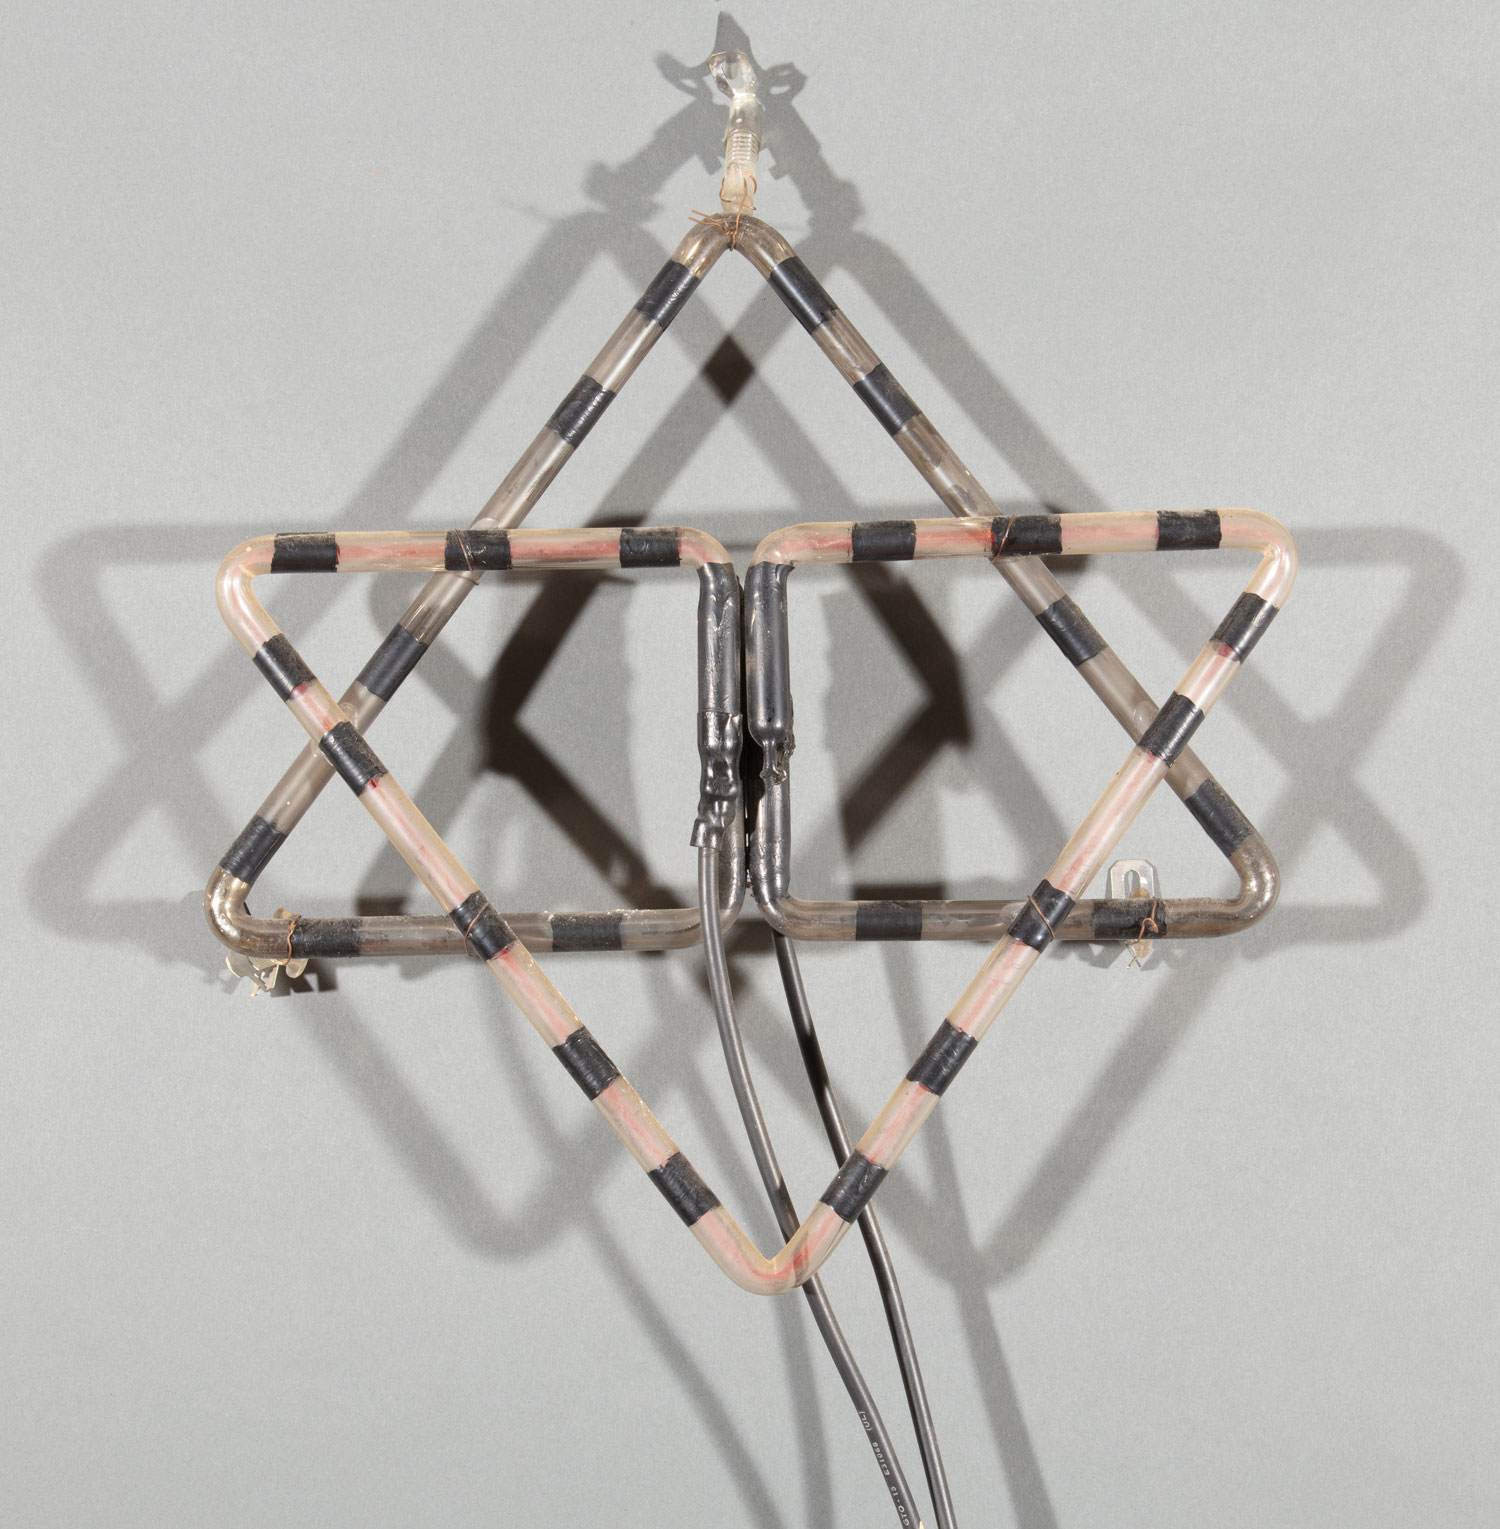 Keith Sonnier (American/Louisiana, 1941-2020), "Star of David", neon and transformer, unsigned, 12 - Image 3 of 3